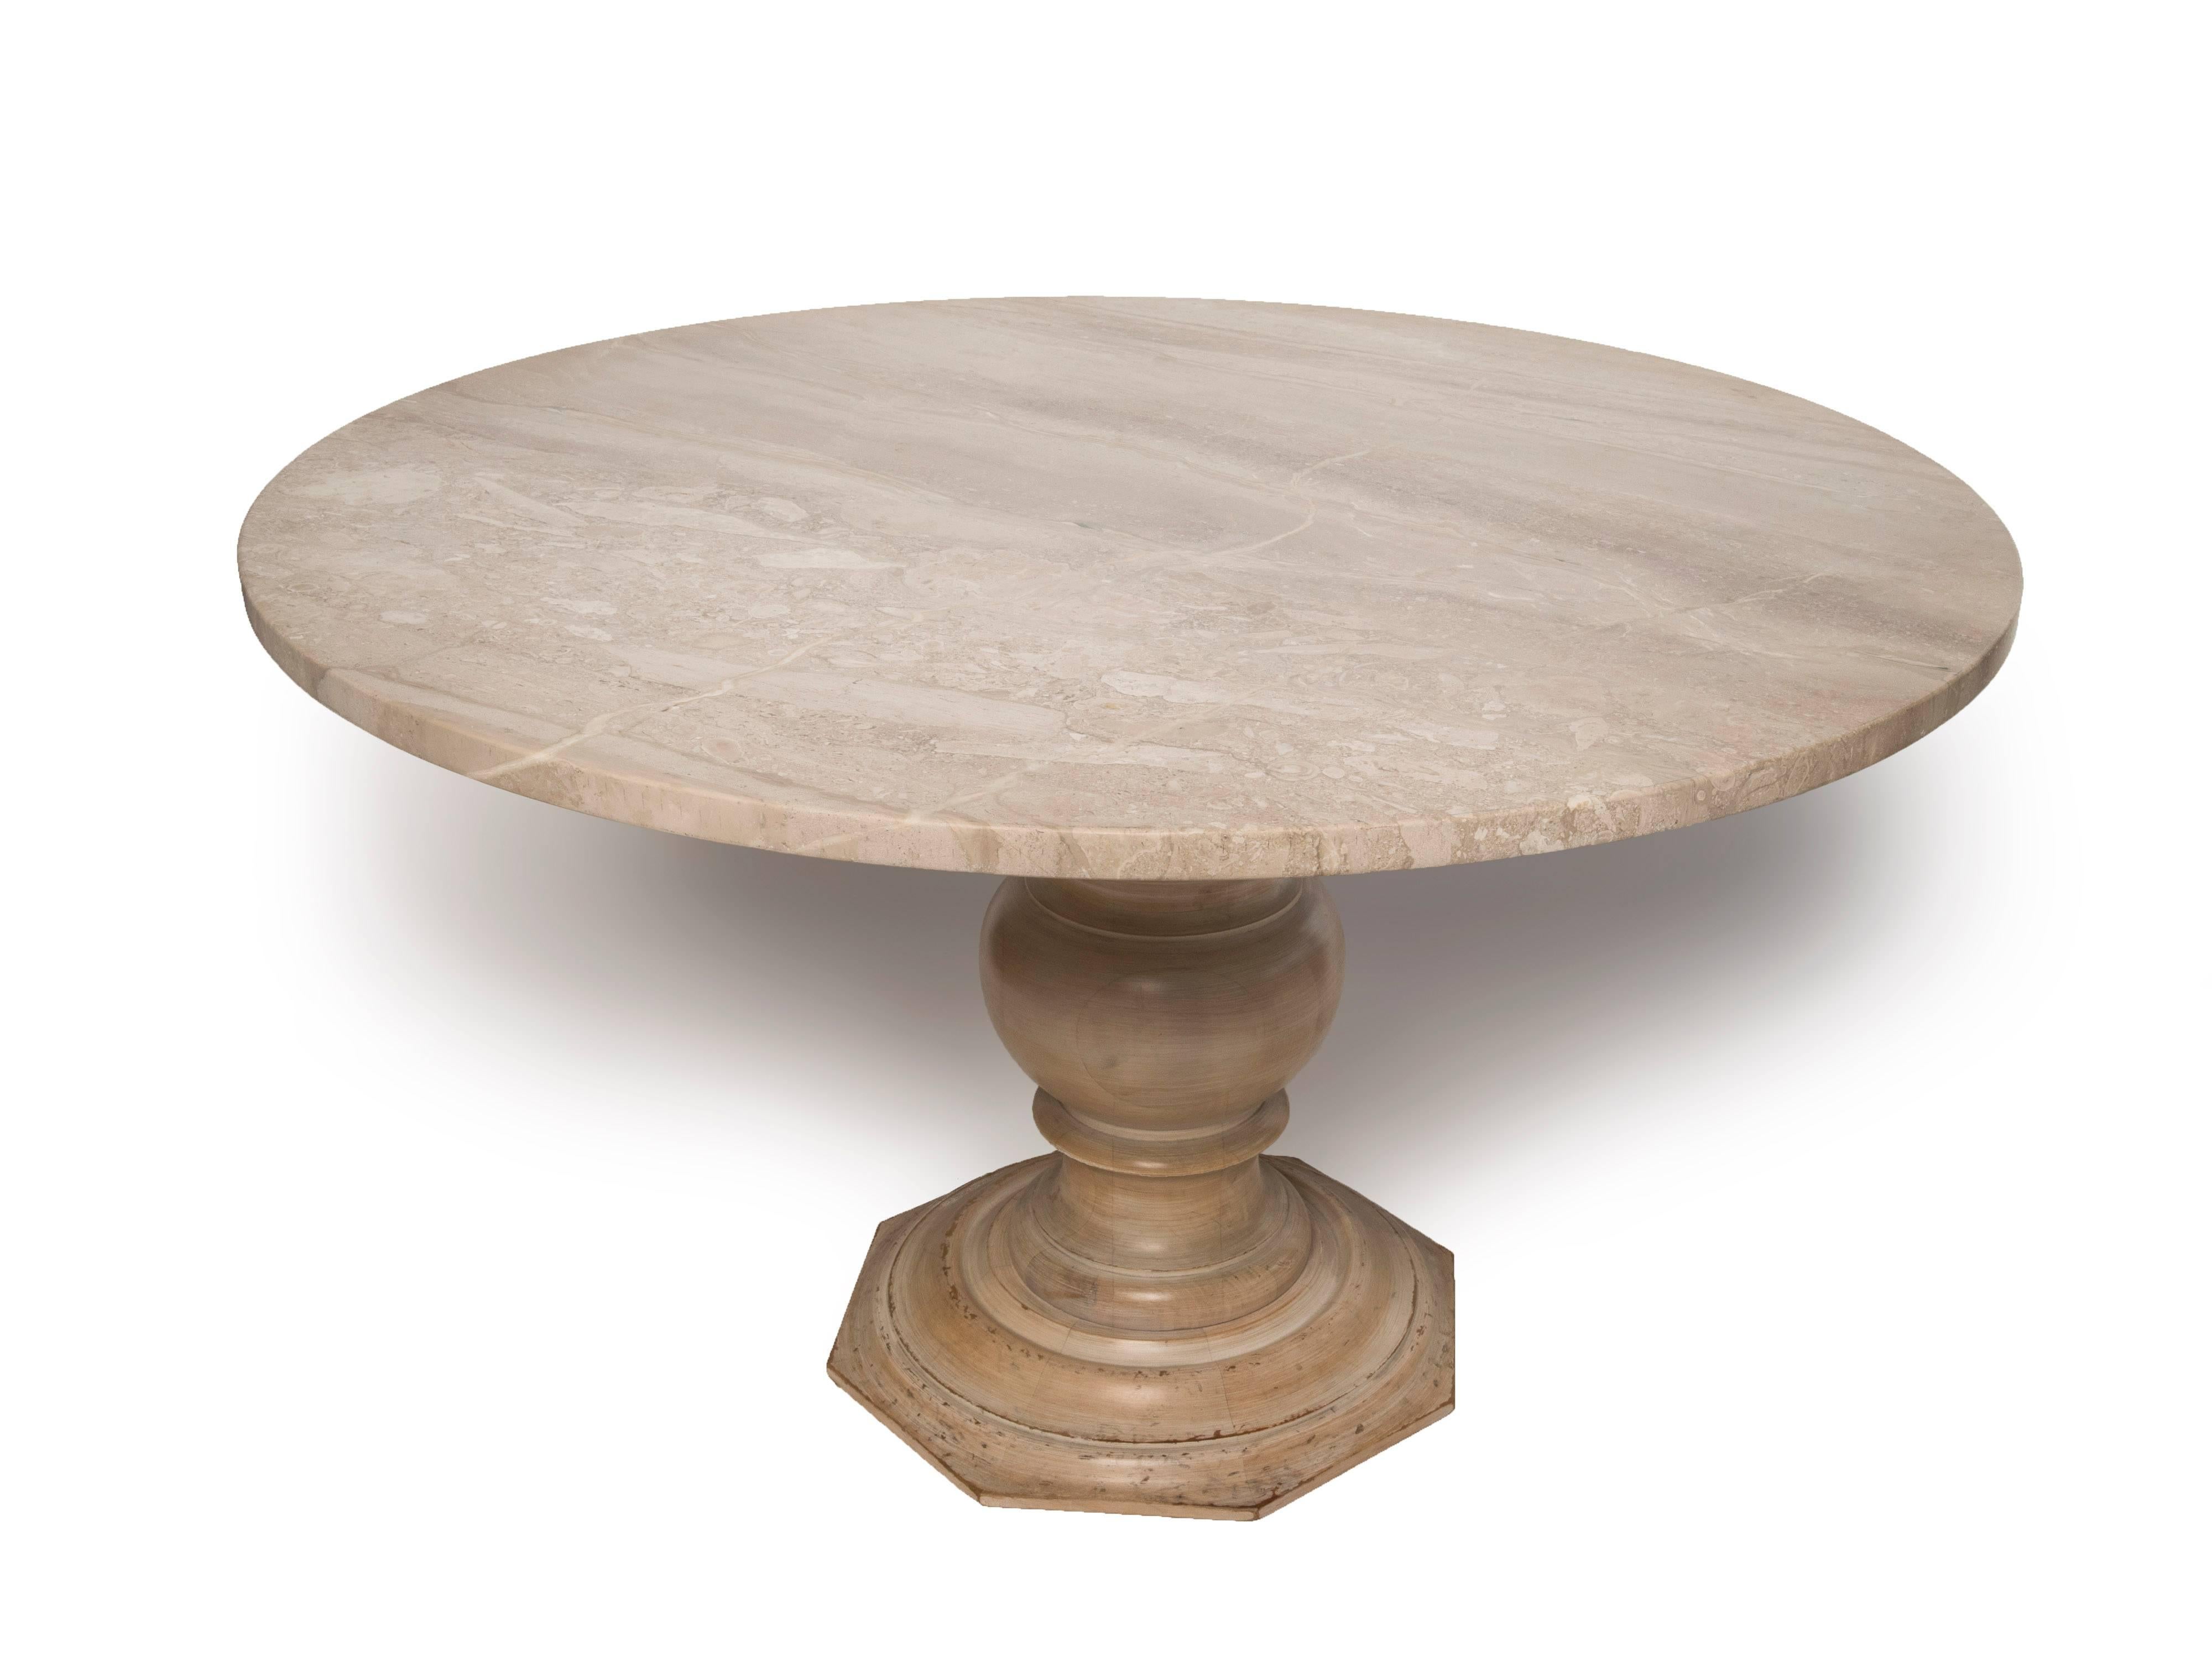 A fruitwood gueridon dining table or center table with a new round limestone top.